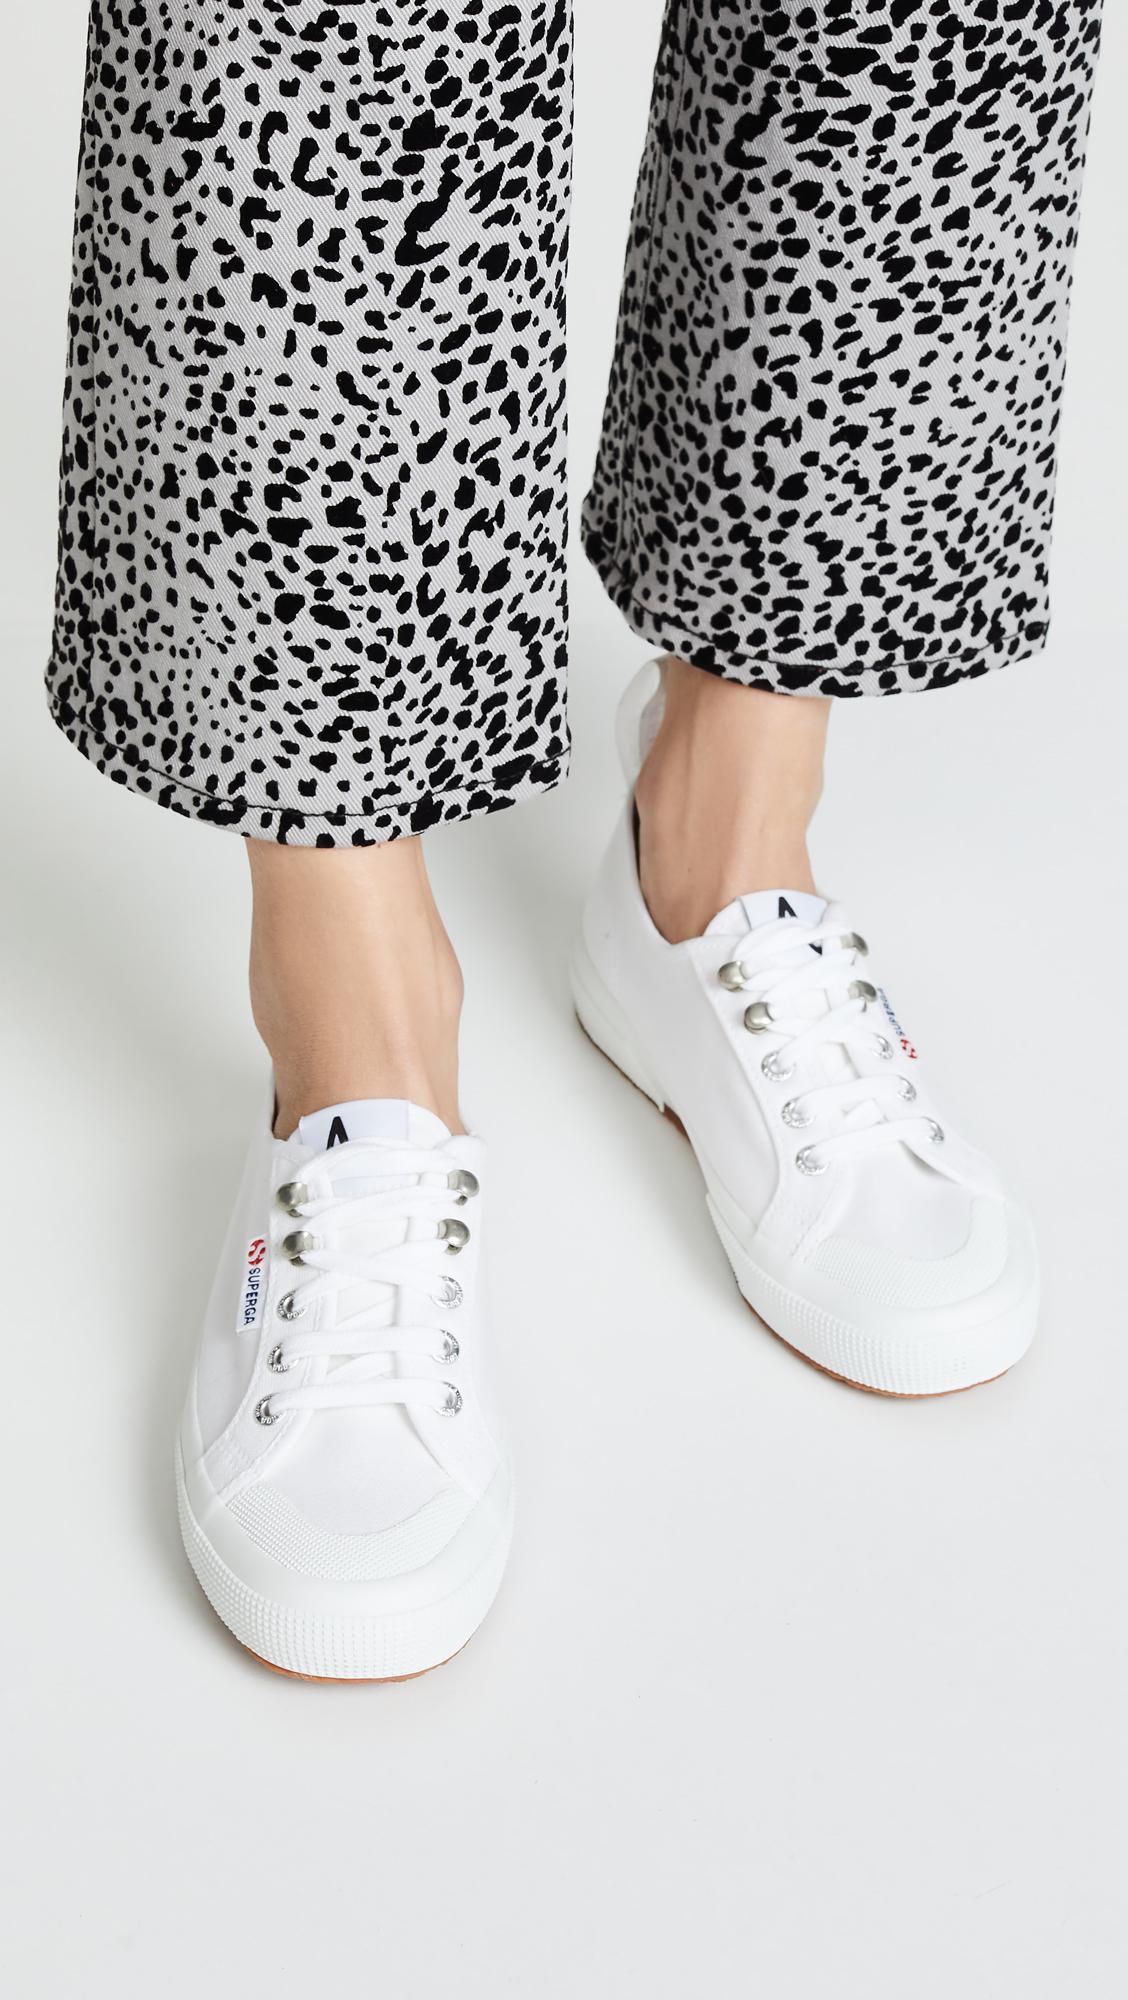 Superga Canvas X Alexa Chung 2294 Cothook Lace Up Sneakers in White - Lyst